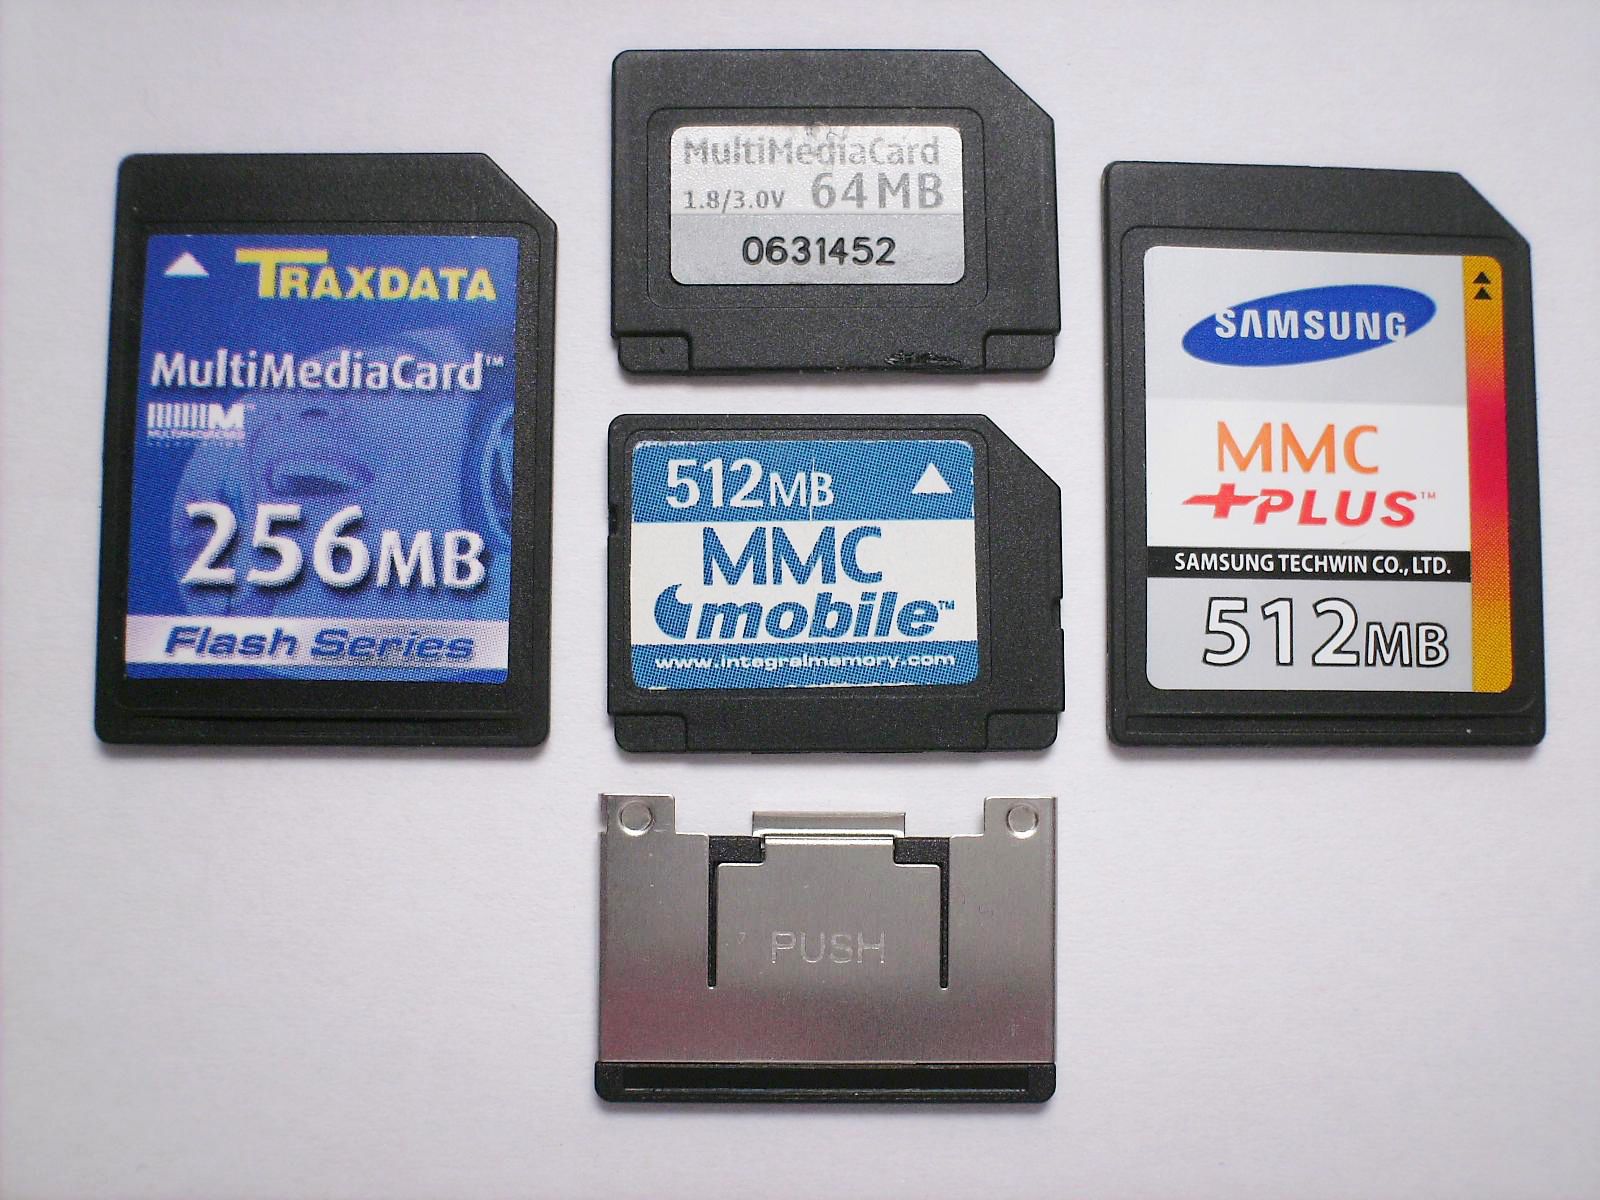 Storage formats of the damned The storage mediums sent to tech heaven image 5